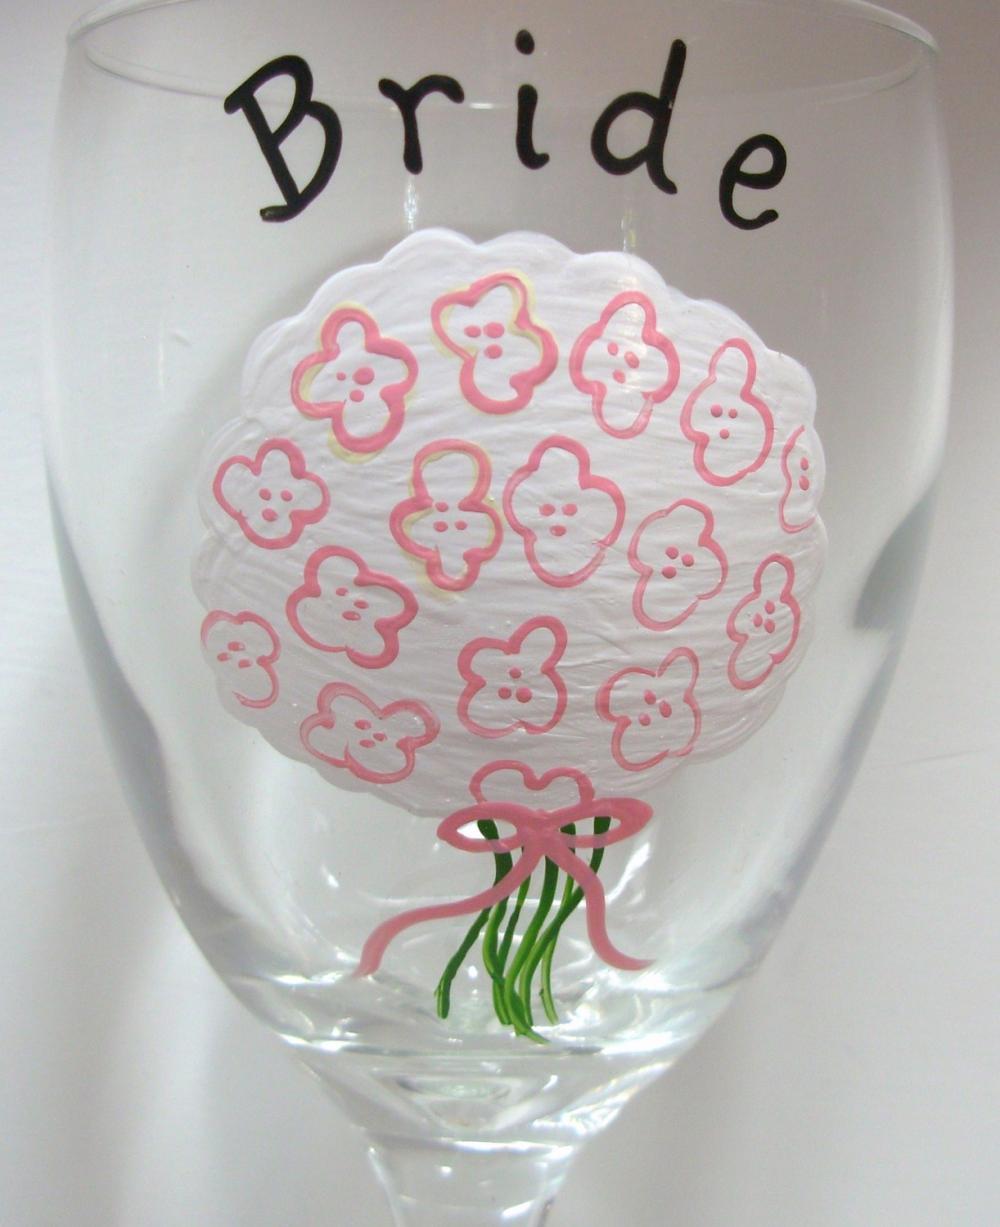 Bridal Bouquet Wine Glass Handpainted For Wedding Party